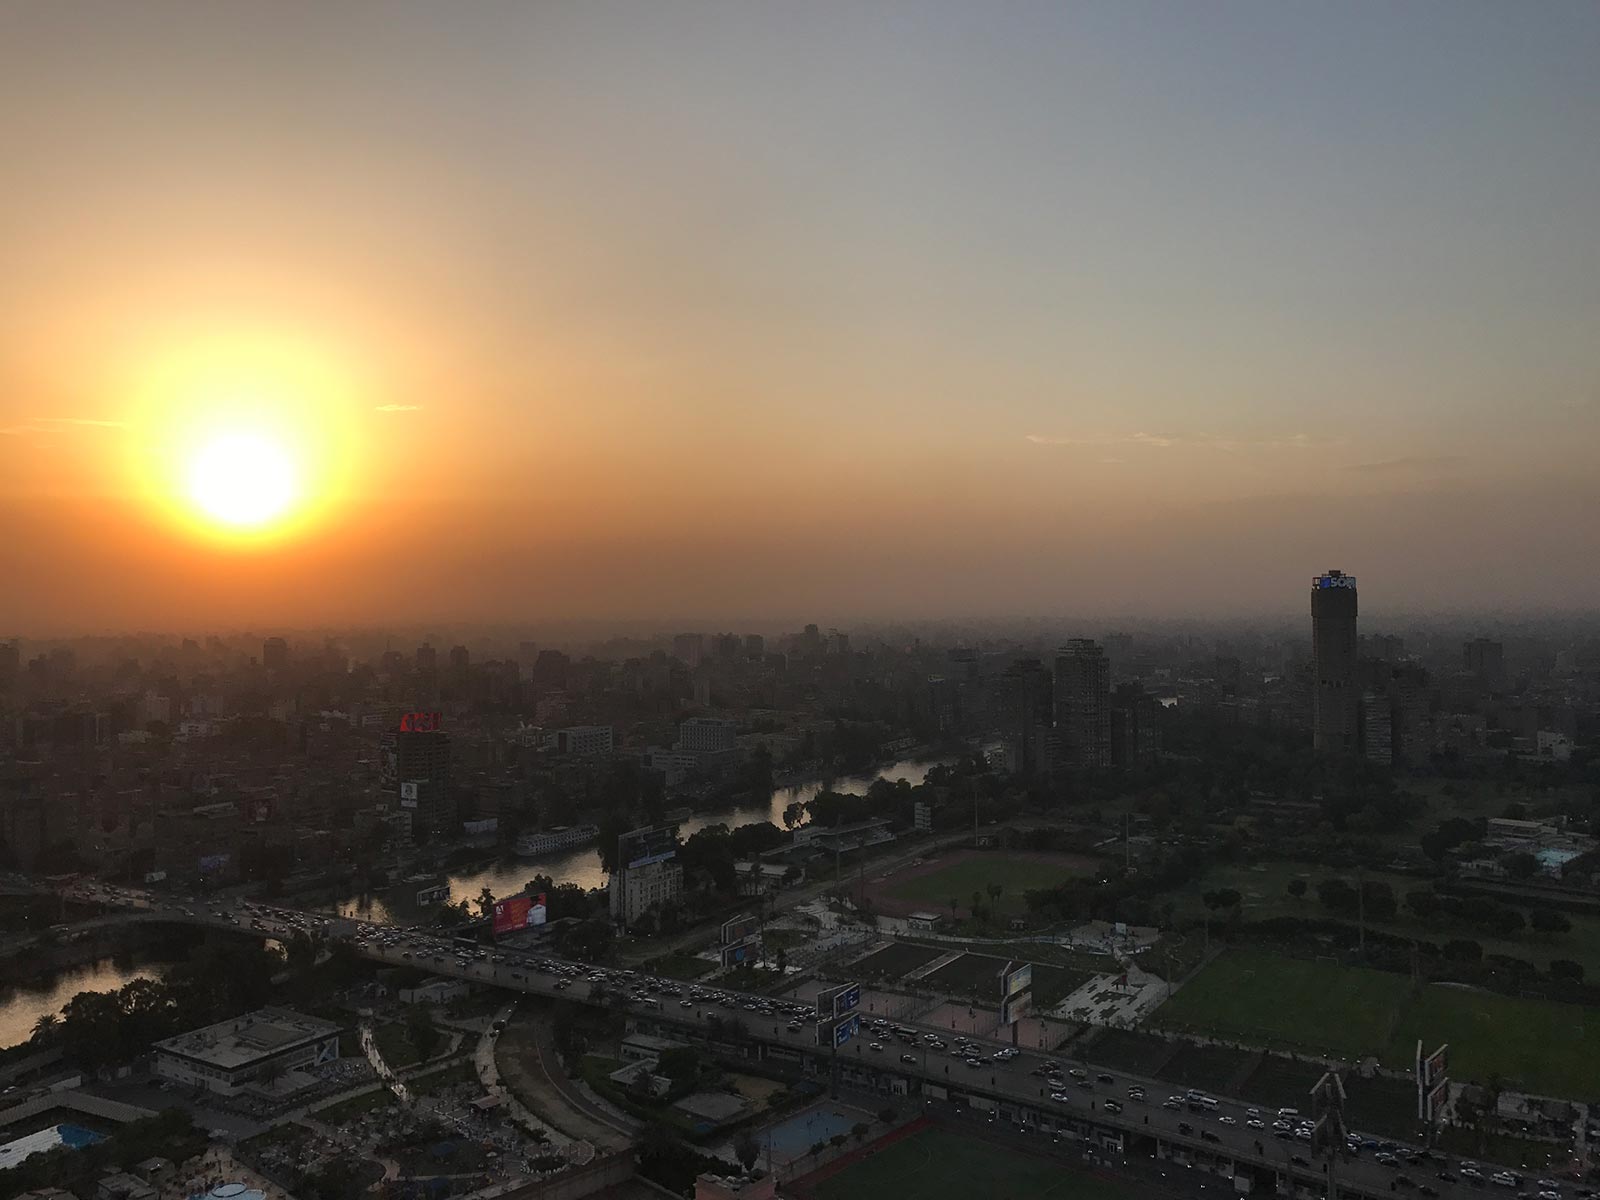 Sunset at Cairo, Egypt. Getting inside the Ancient Pyramids of Giza